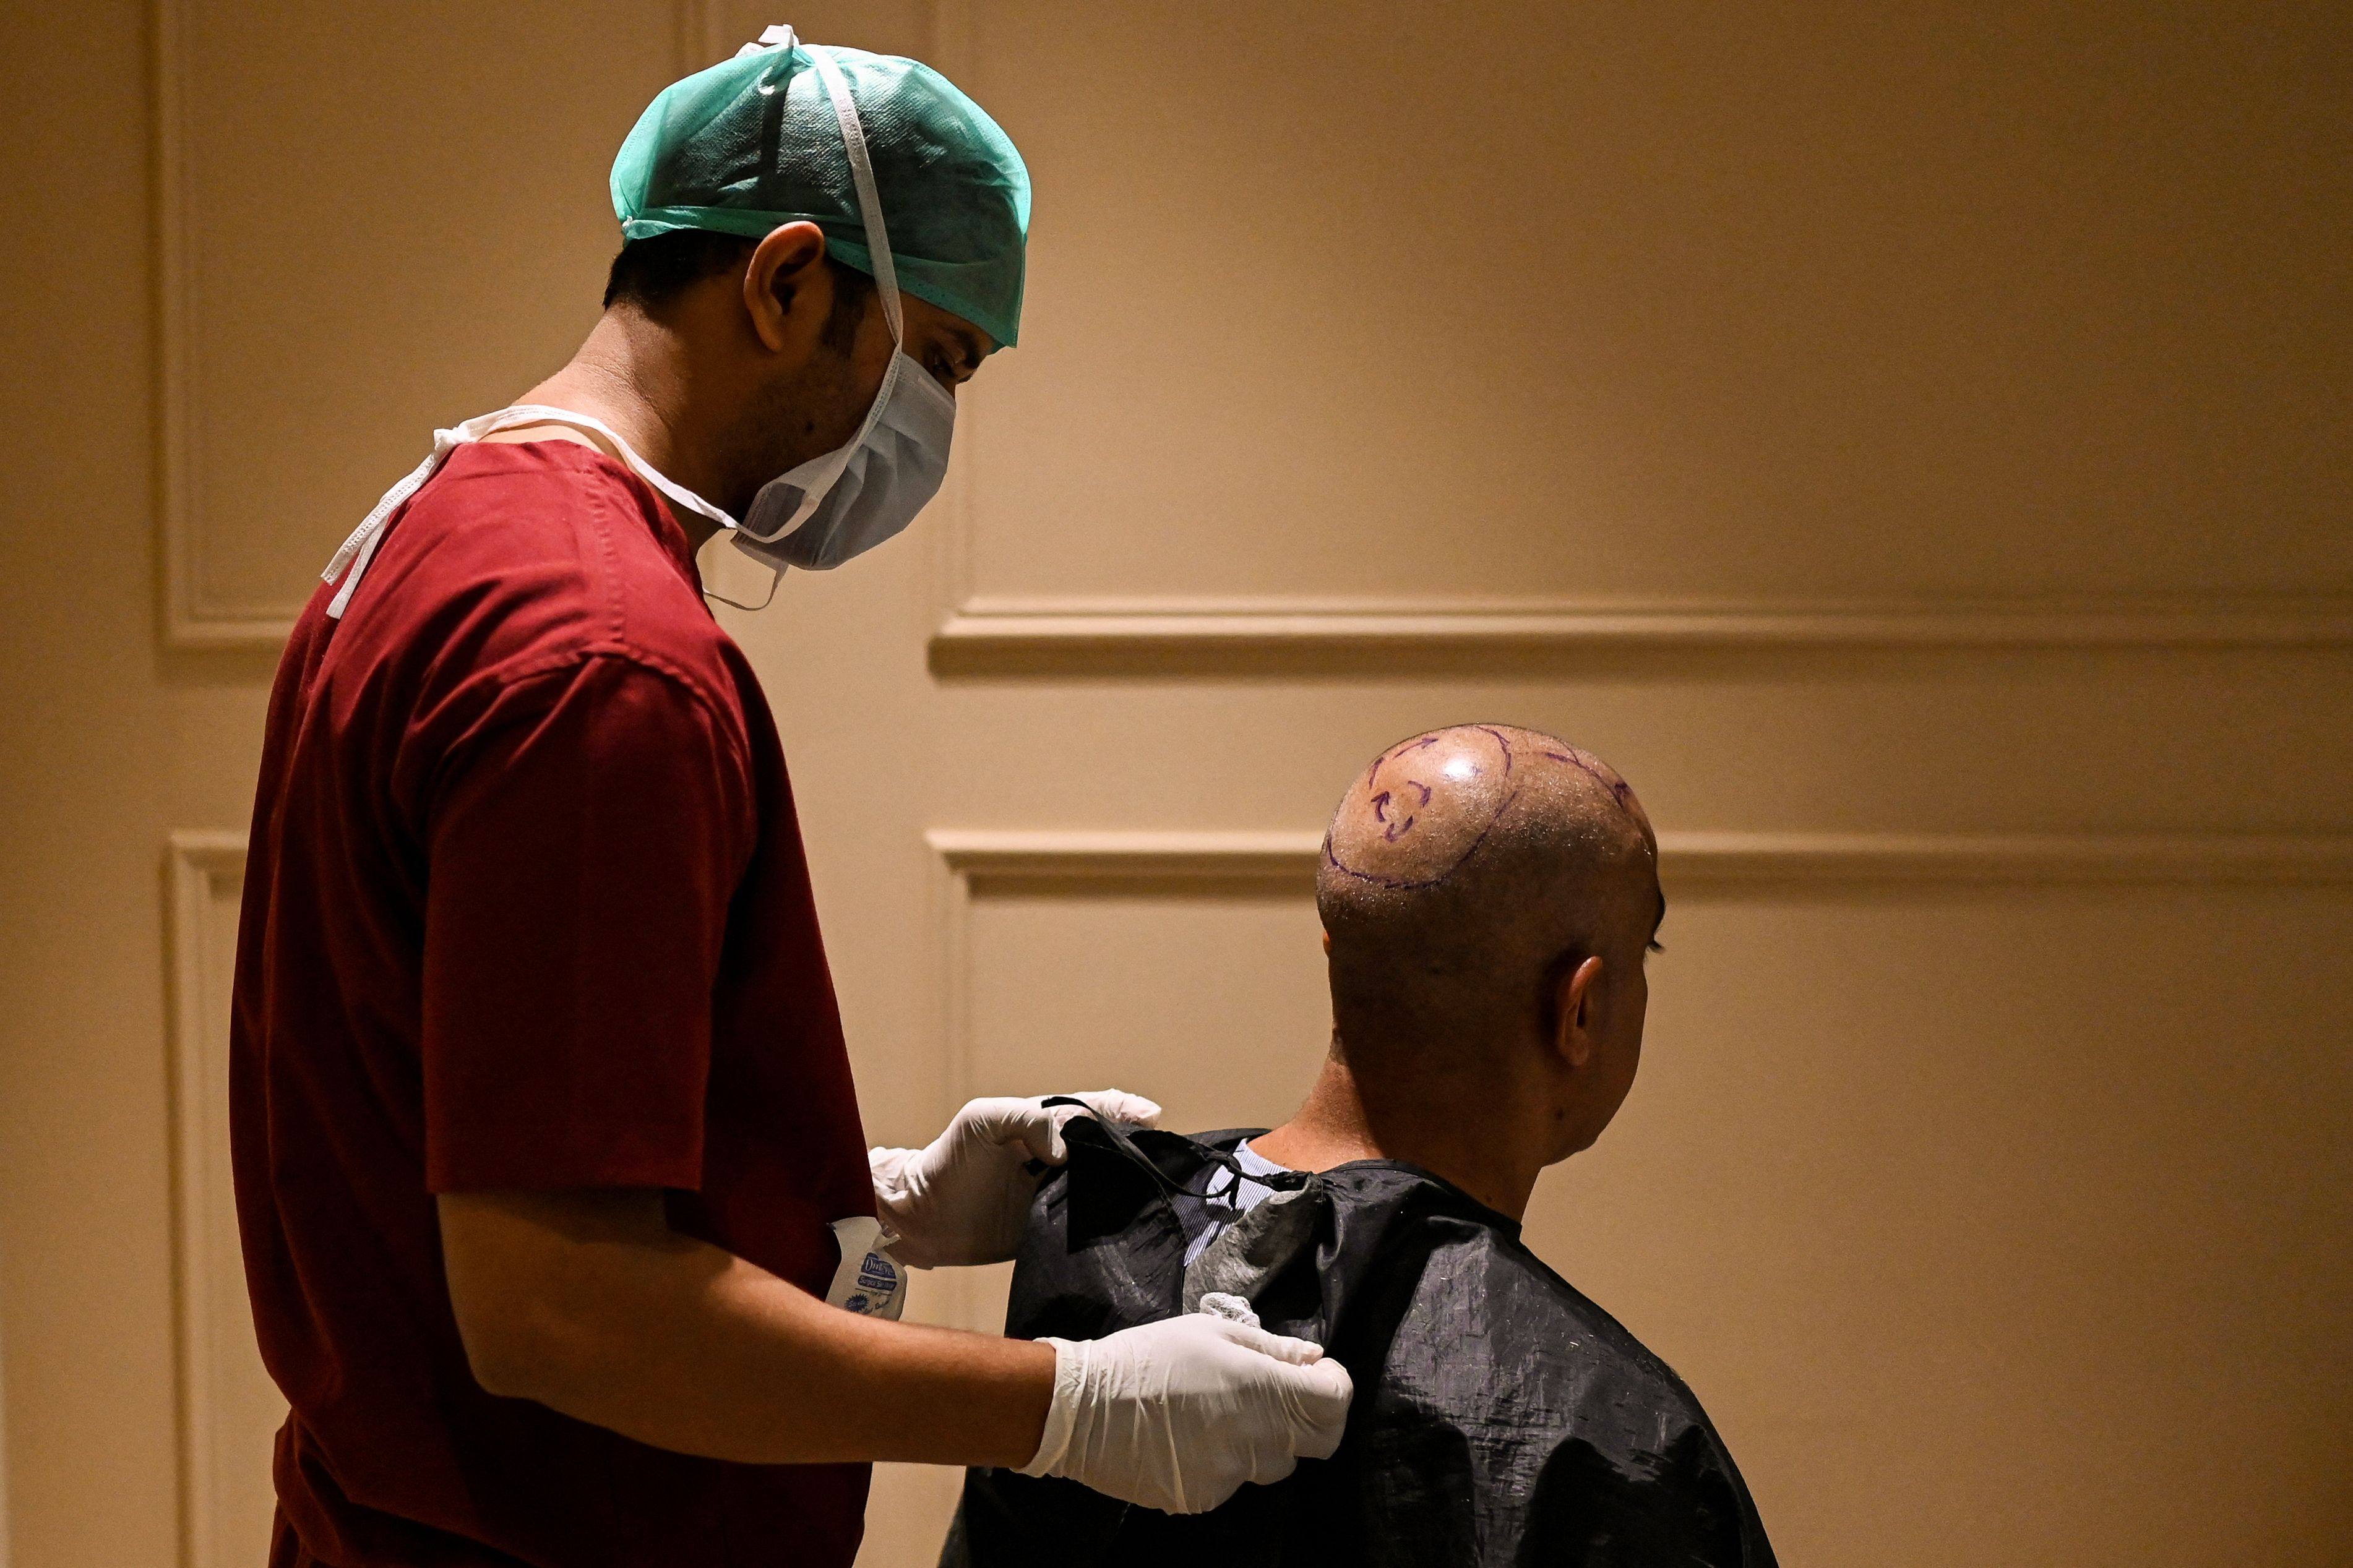 How Indian man's hair transplant turned fatal | South China Morning Post